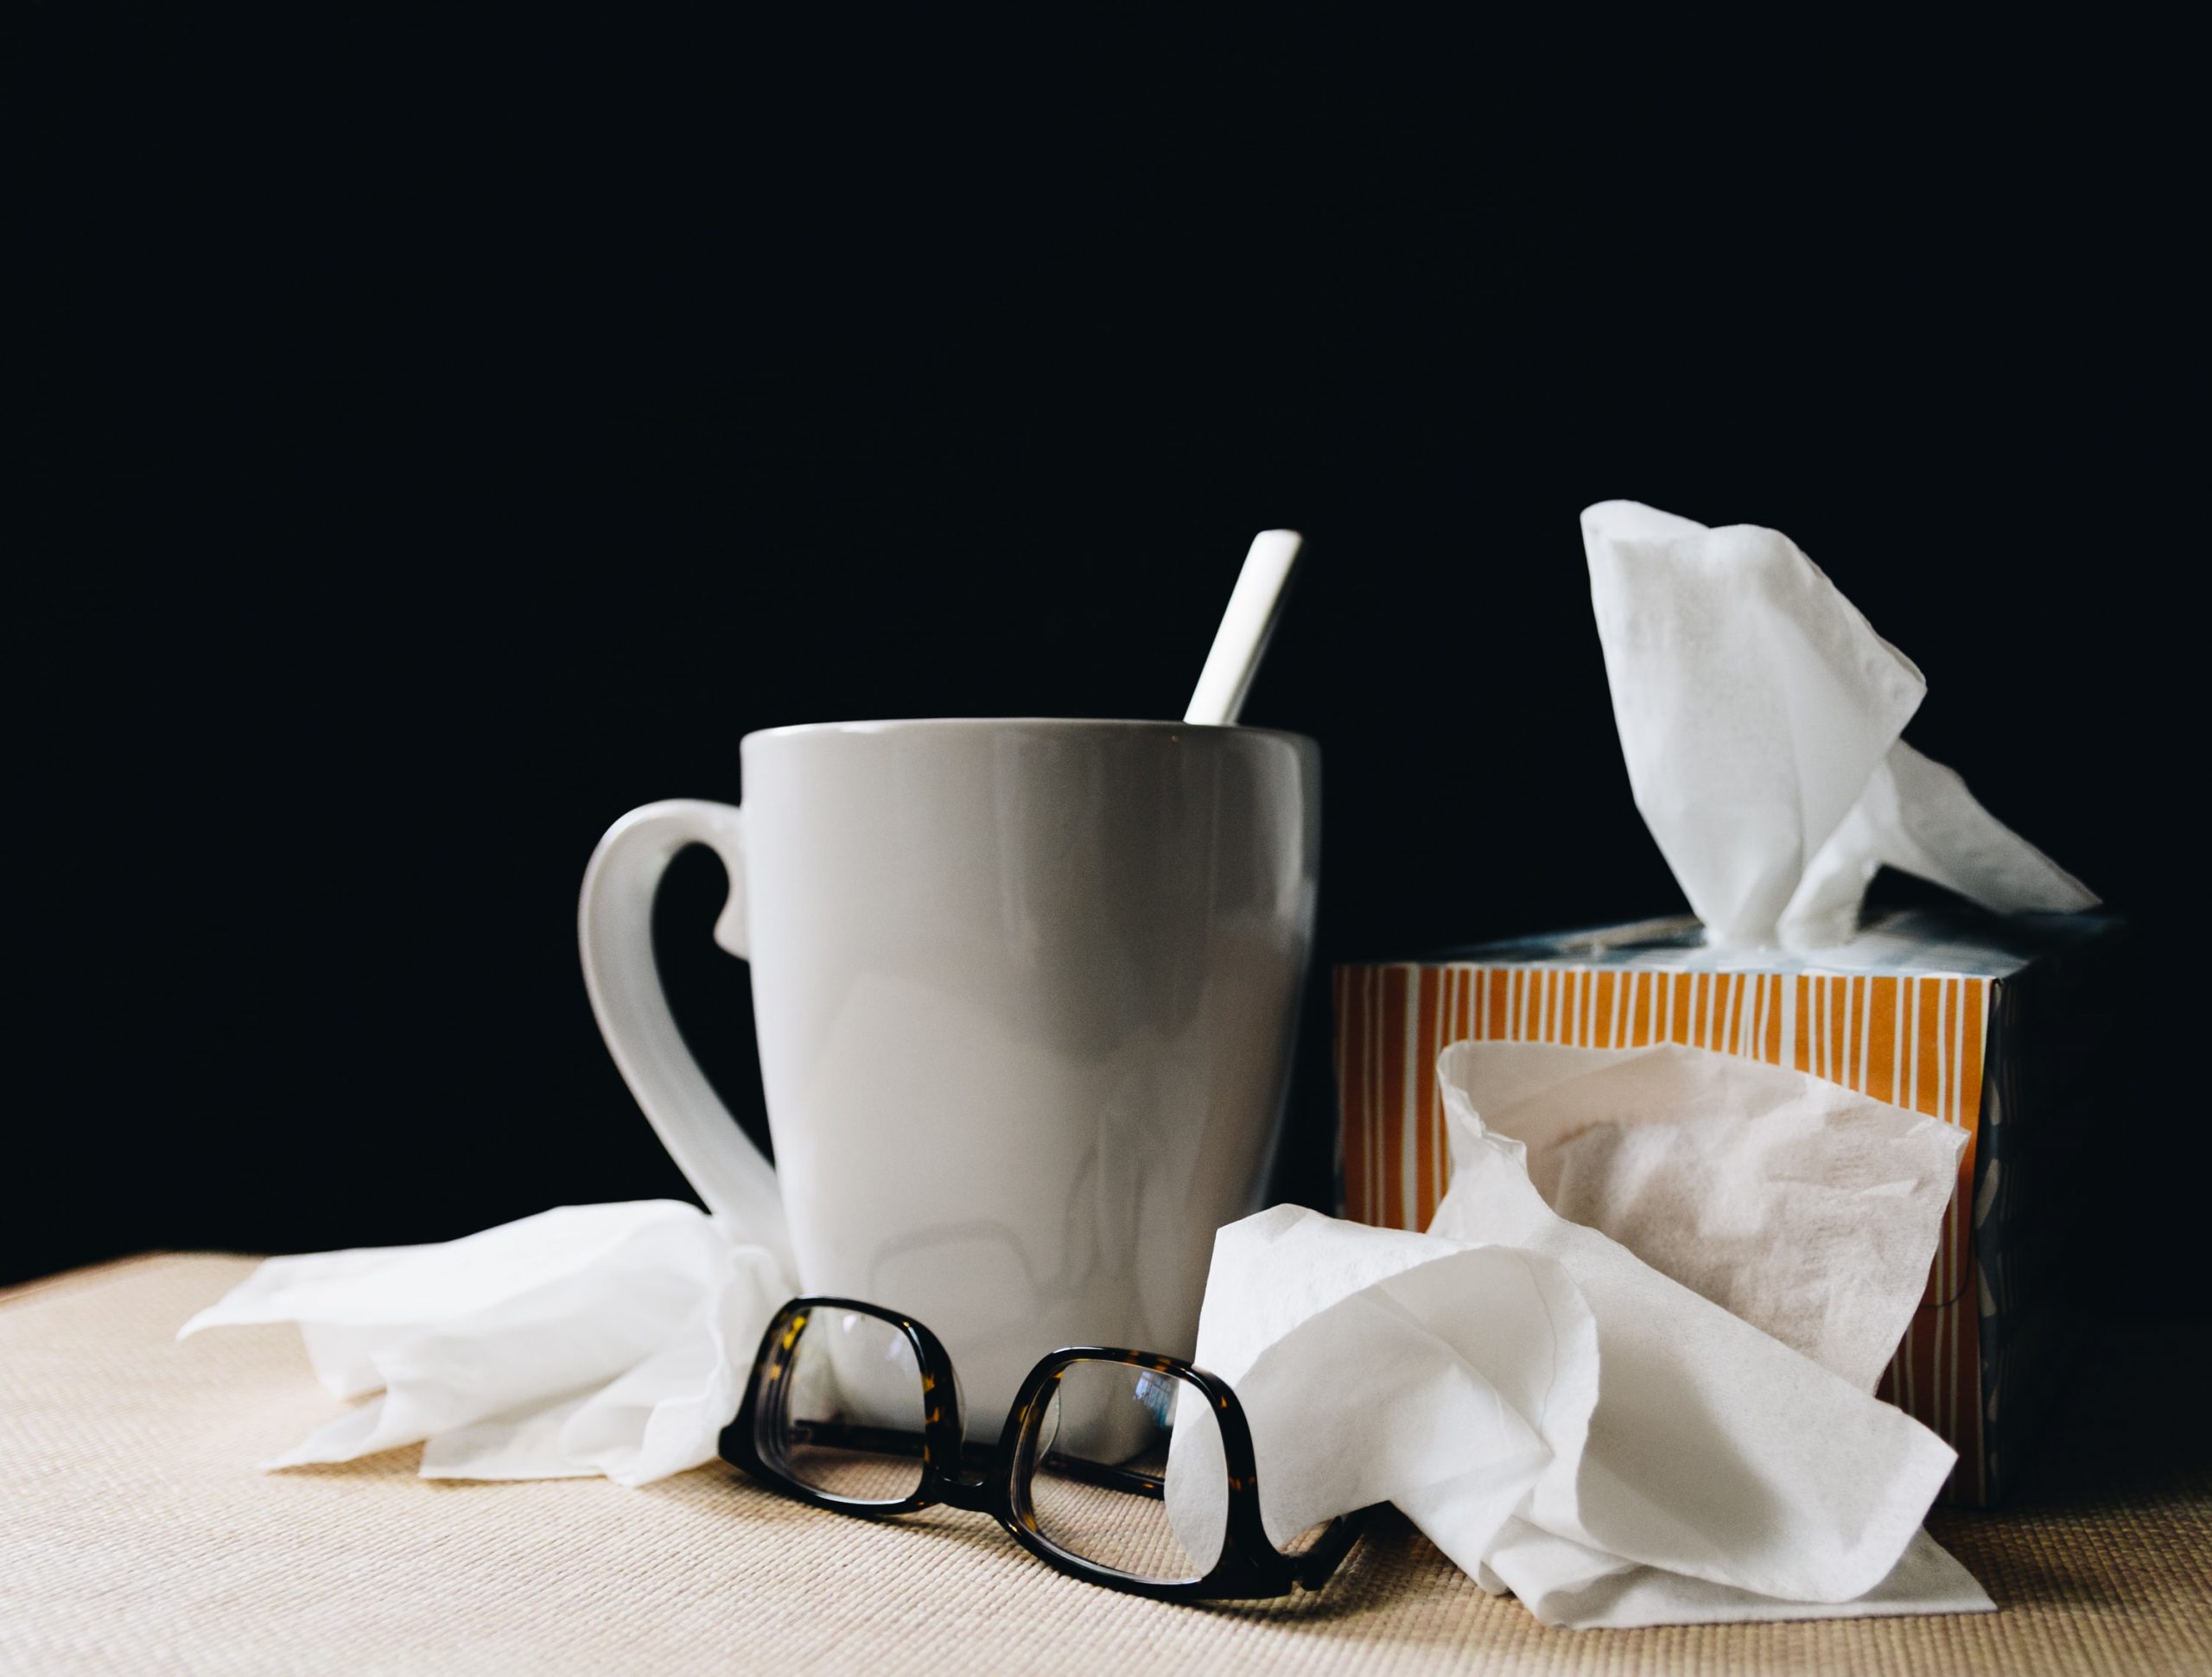 Tissues used by person who has a cold